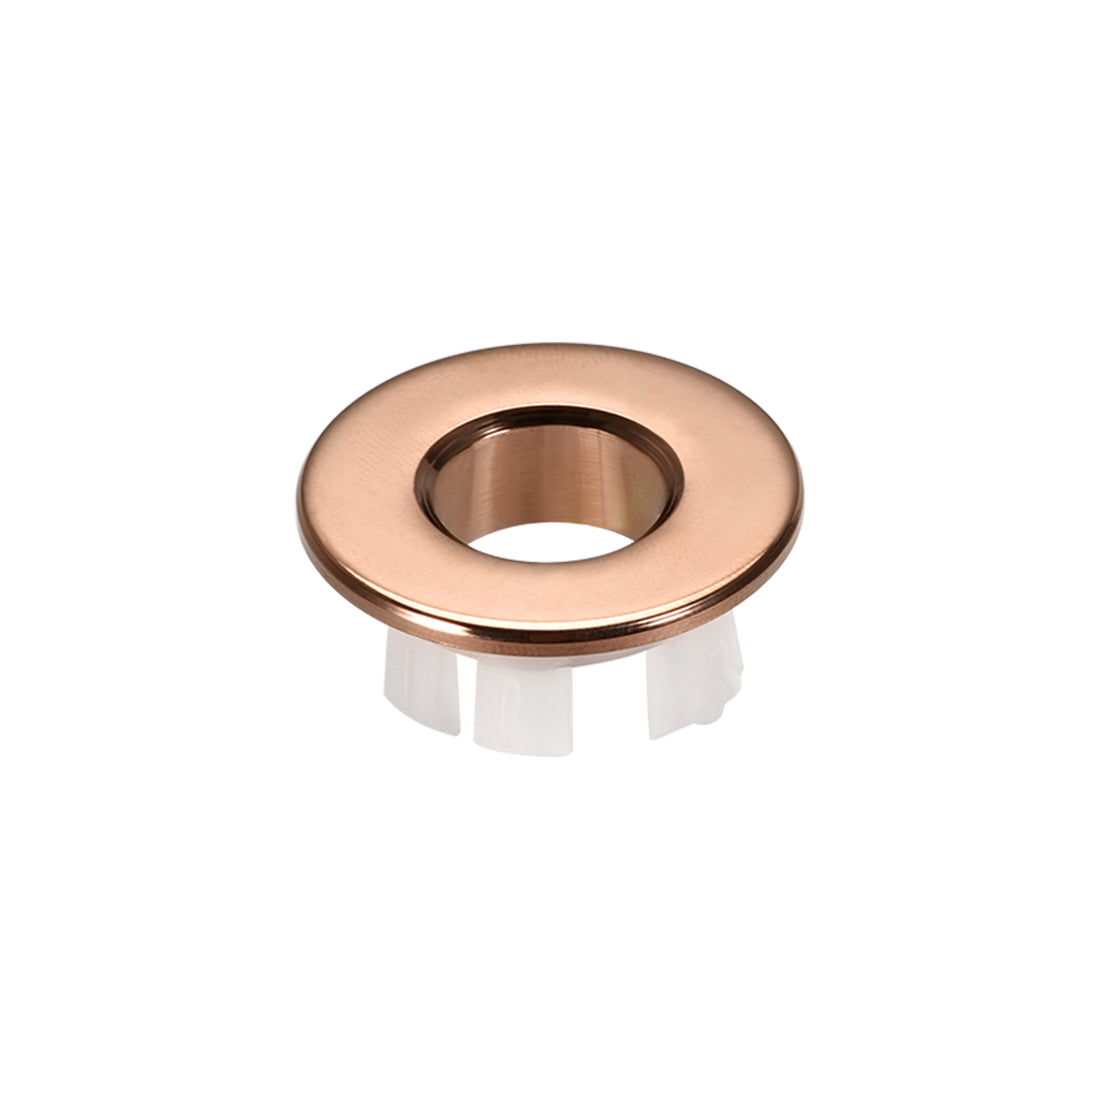 uxcell Uxcell Sink Basin Trim Overflow Cover Copper Insert in Hole Round Caps